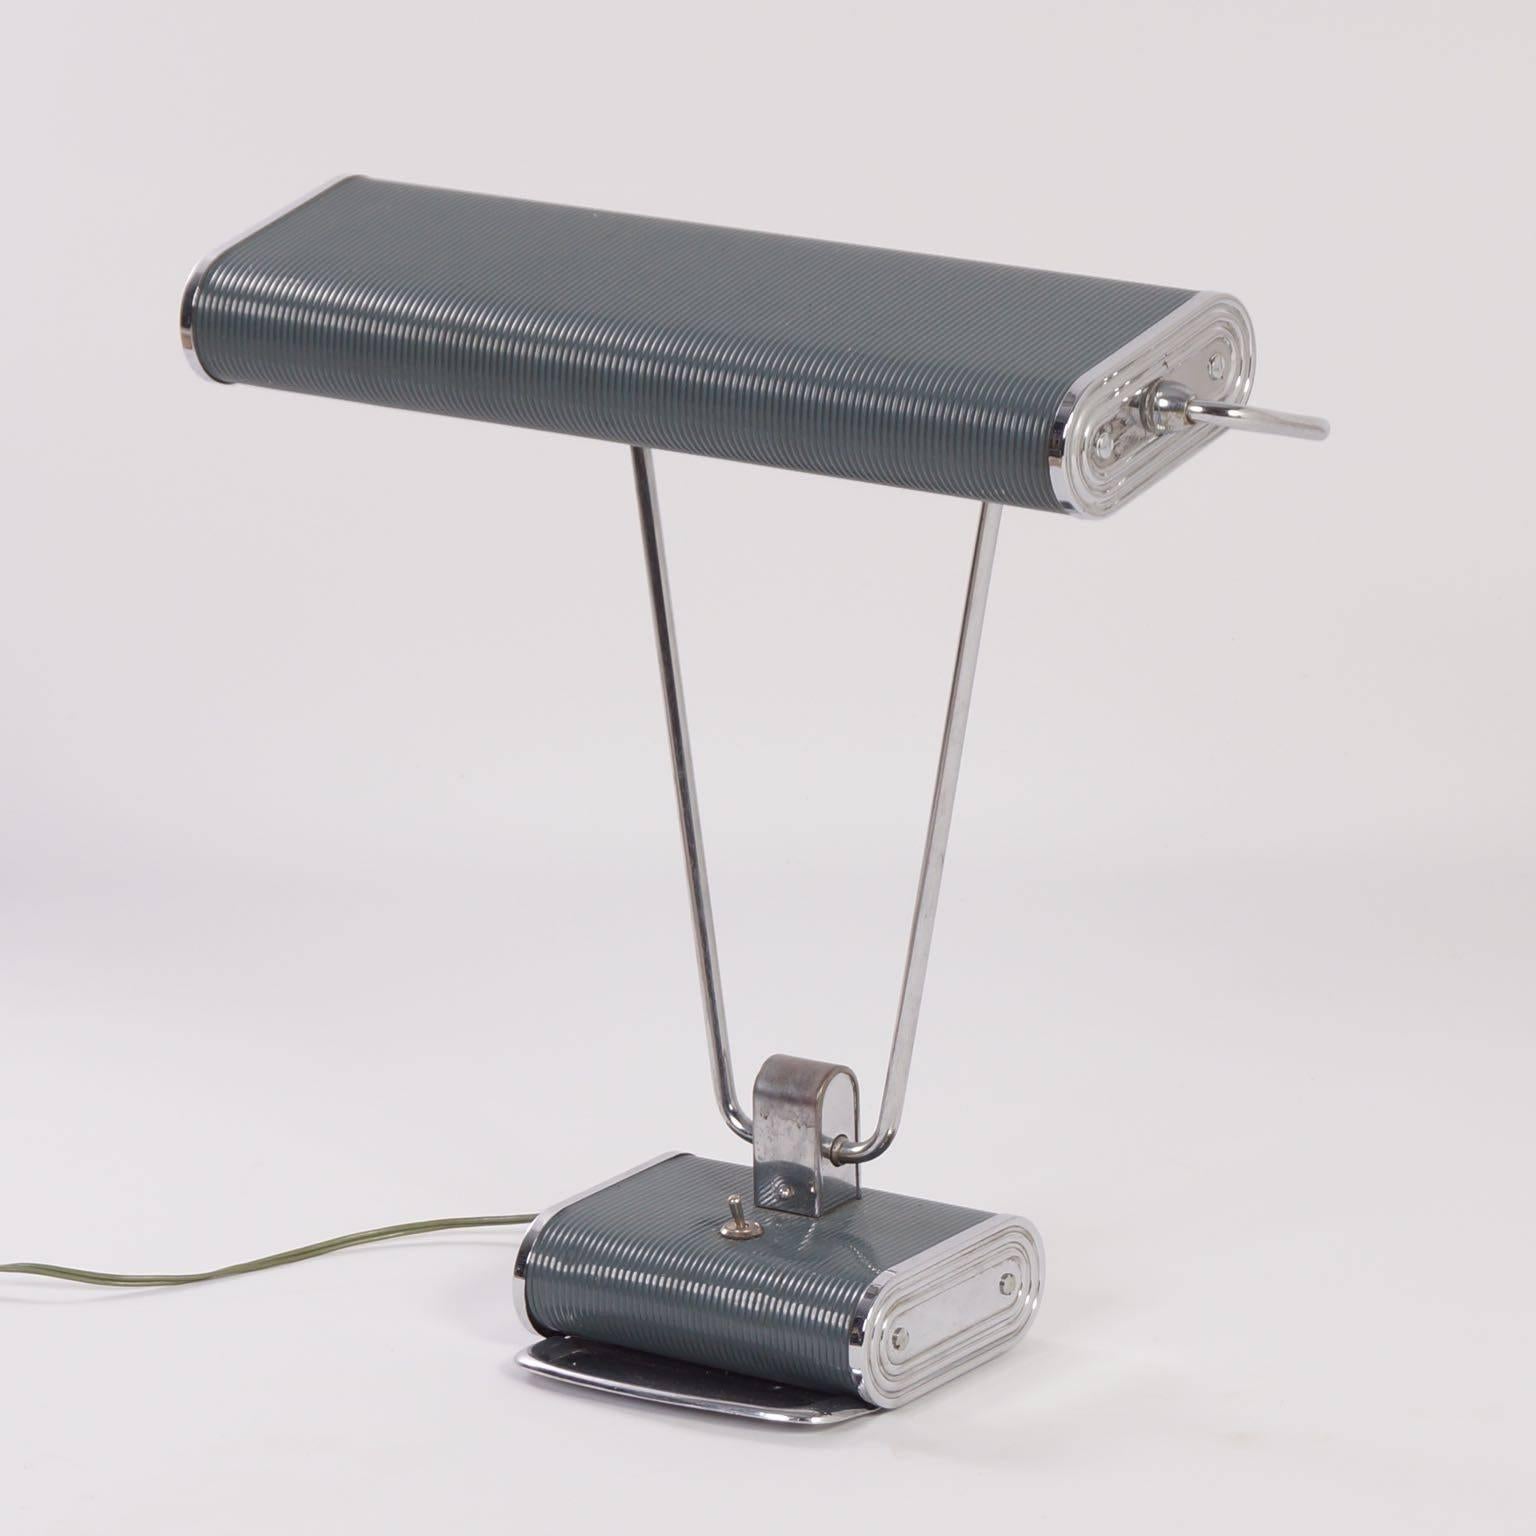 French Art Deco Desk Lamp by Eileen Gray for Jumo, 1930s For Sale